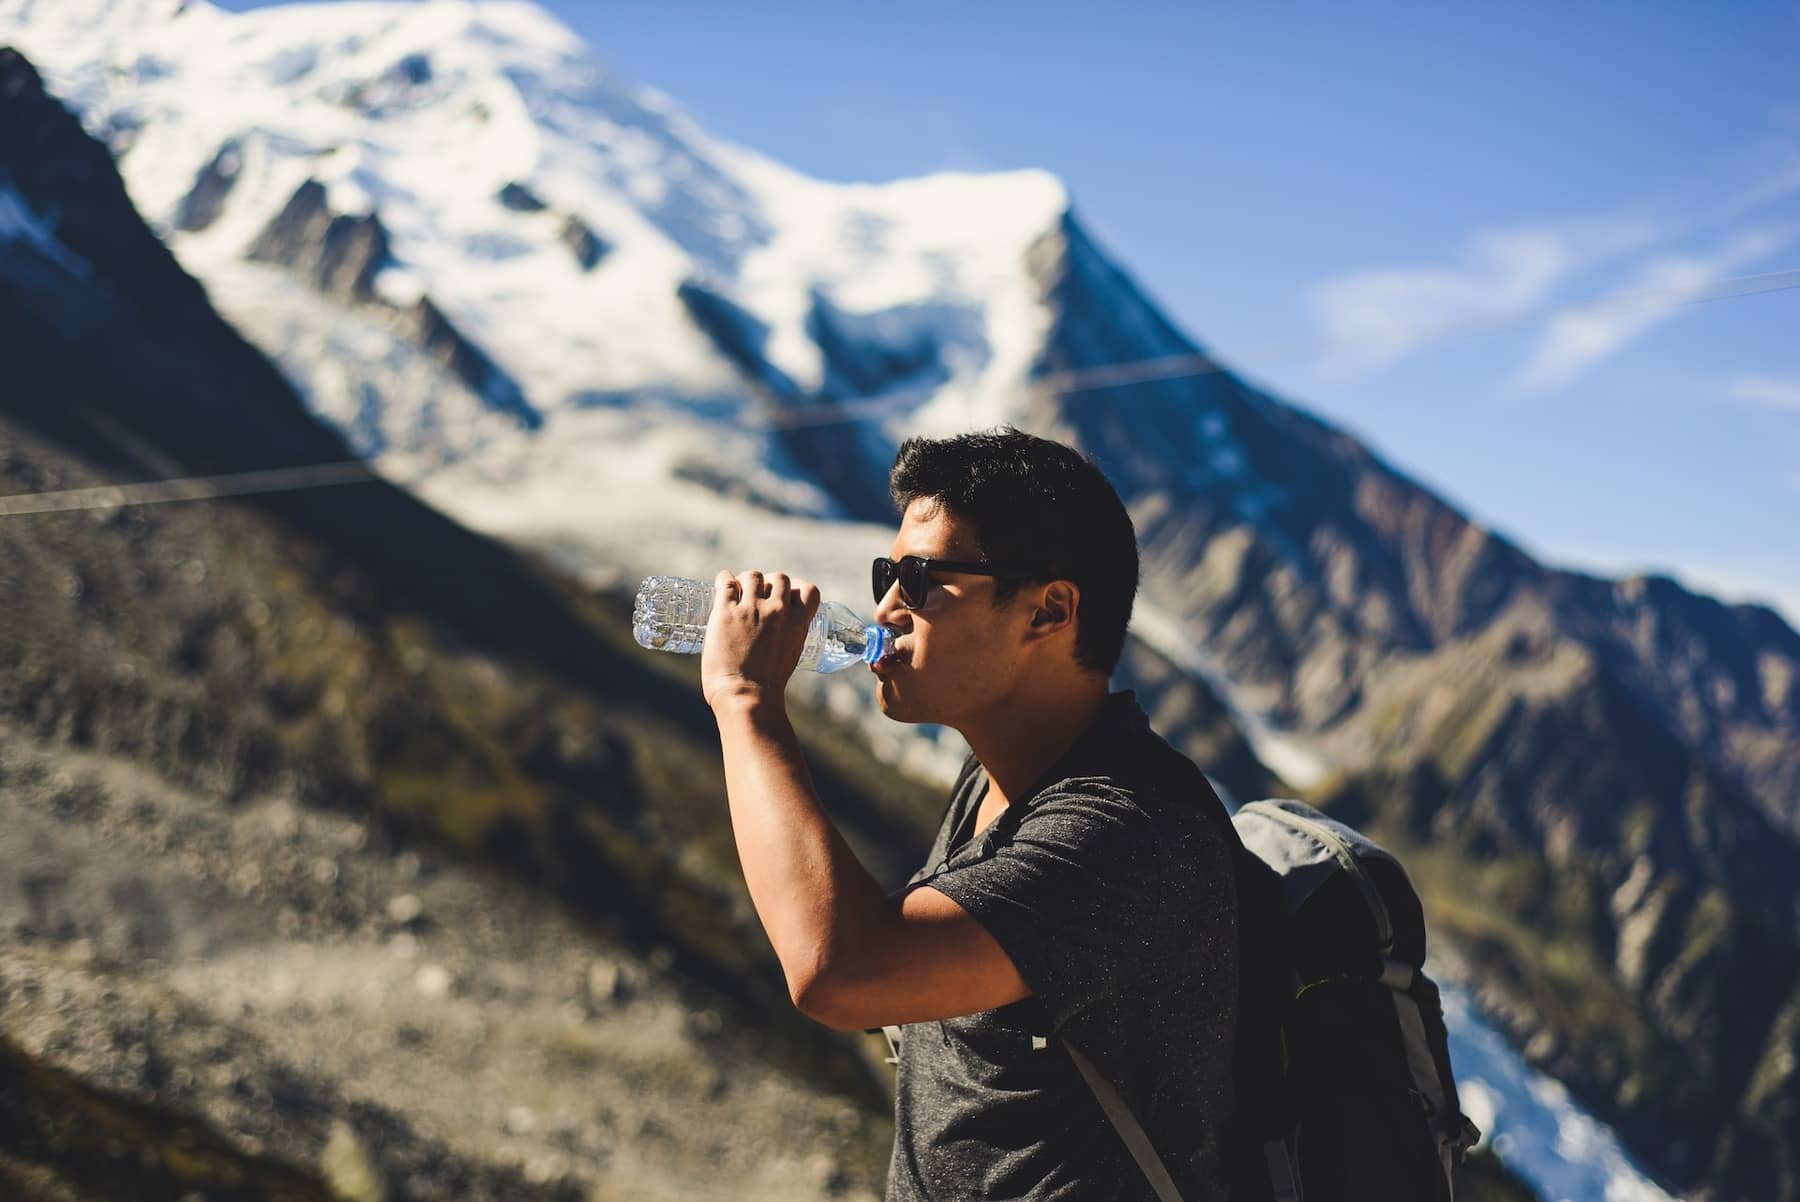 Man drinking water on a hike with mountains in background to convey tips for staying hydrated